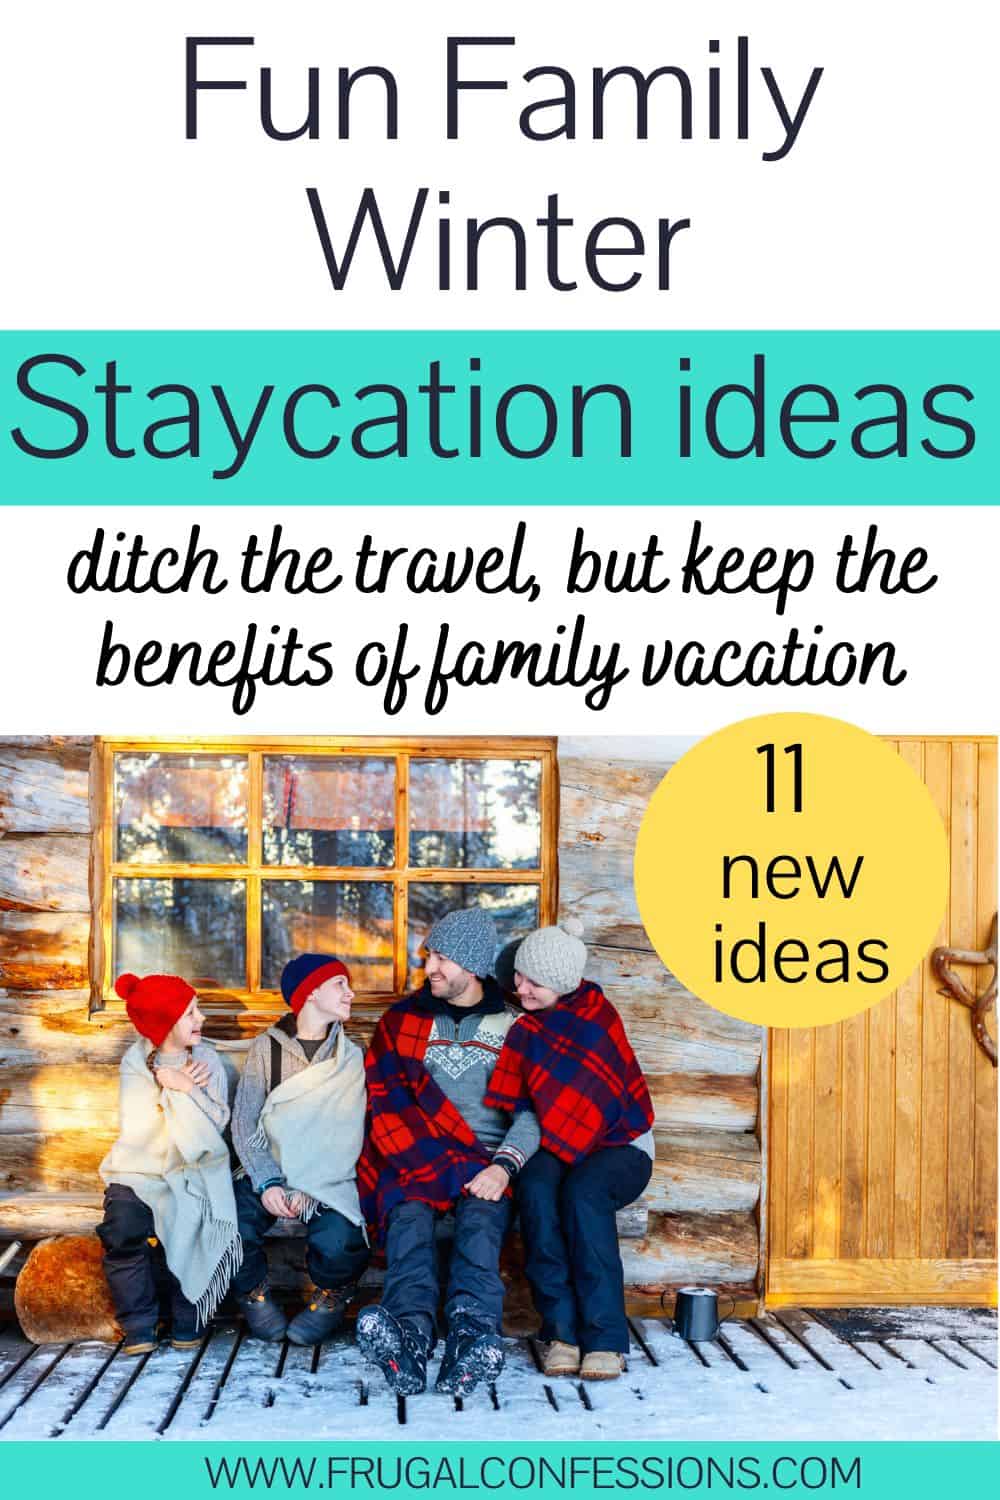 family wrapped in plaid blankets on porch of wooden cottage, text overlay "fun family winter staycation ideas"